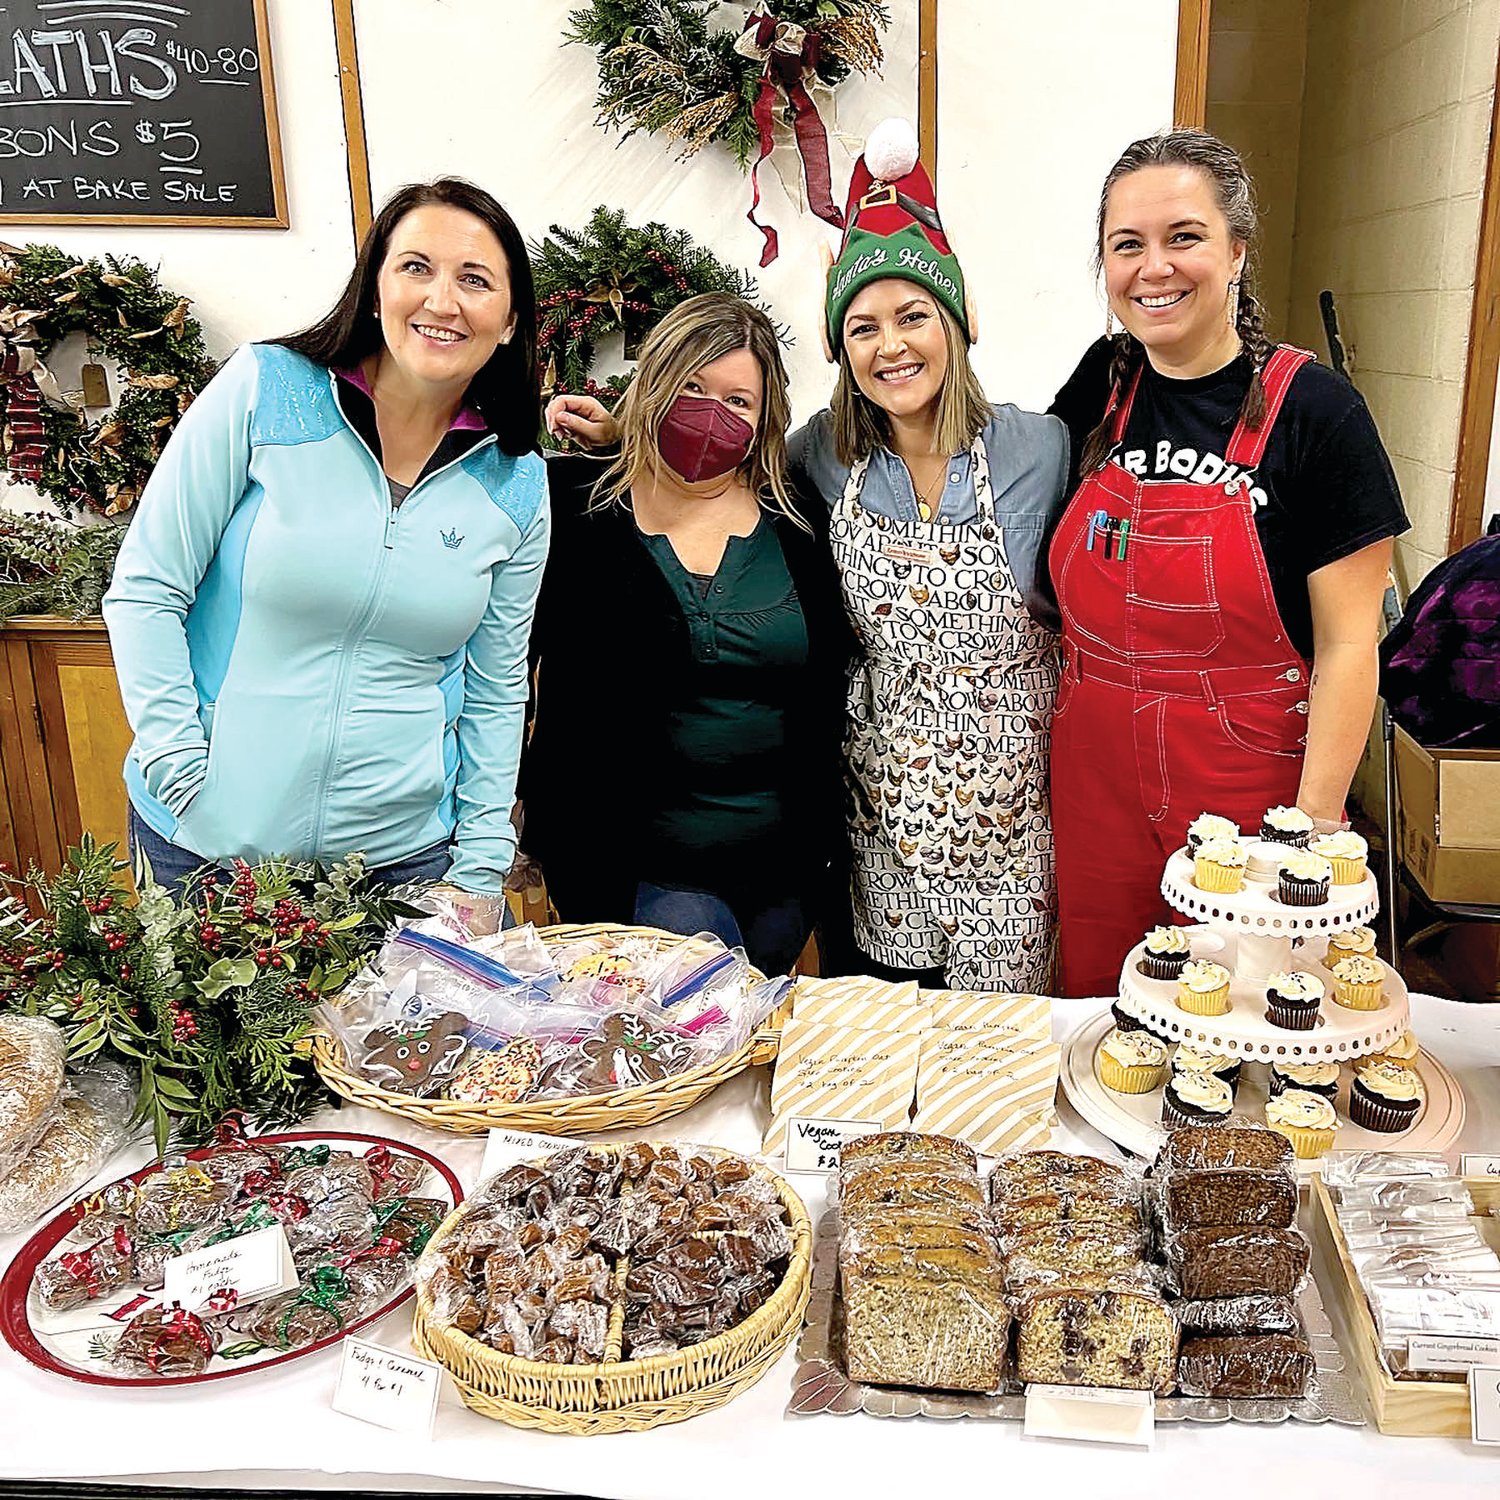 Members of the Buckingham Friends School community gather around the bake sale table.